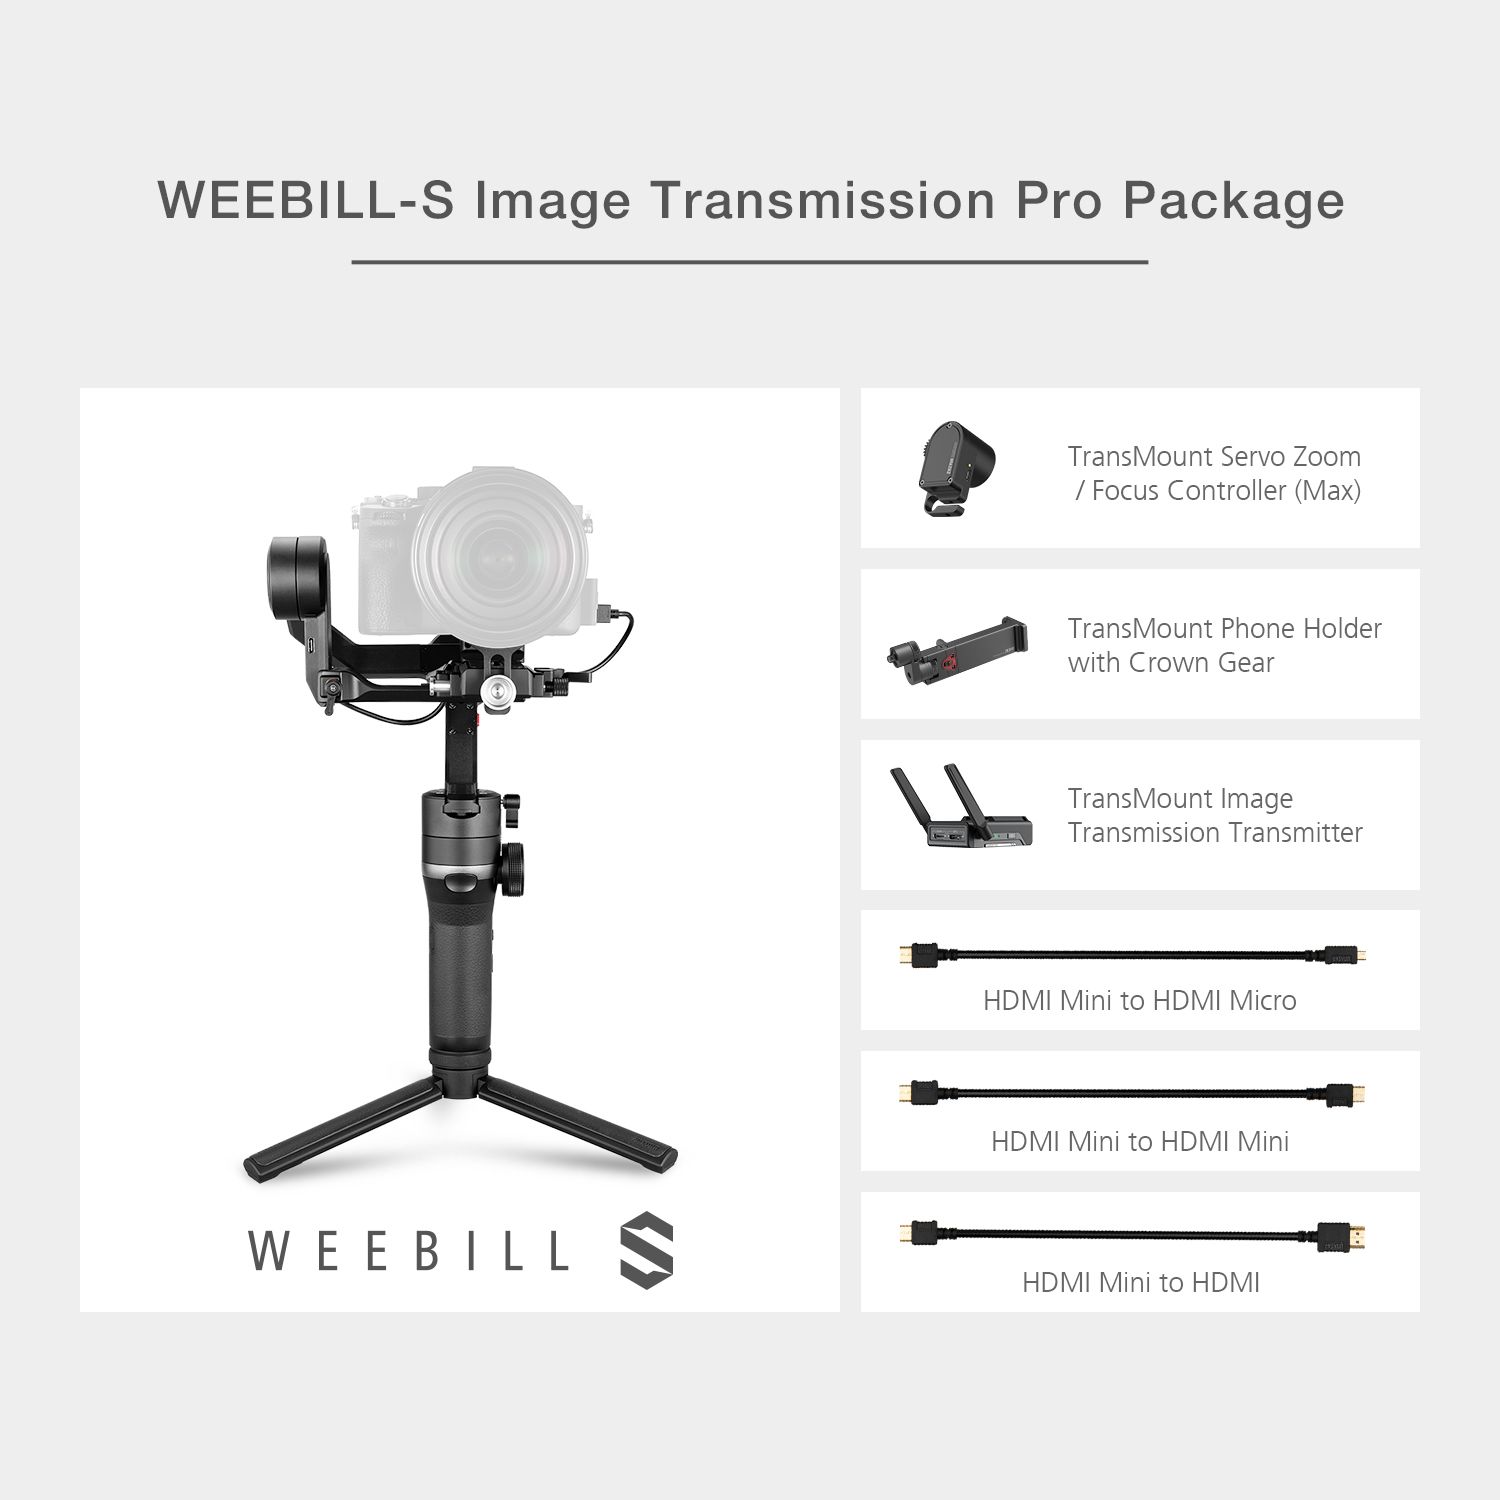 Zhiyun-Weebill-S-Image-Transmission-Pro-3-Axis-Handheld-Gimbal-Stabilizer-with-CMF-04-Follow-Focus-I-1612936